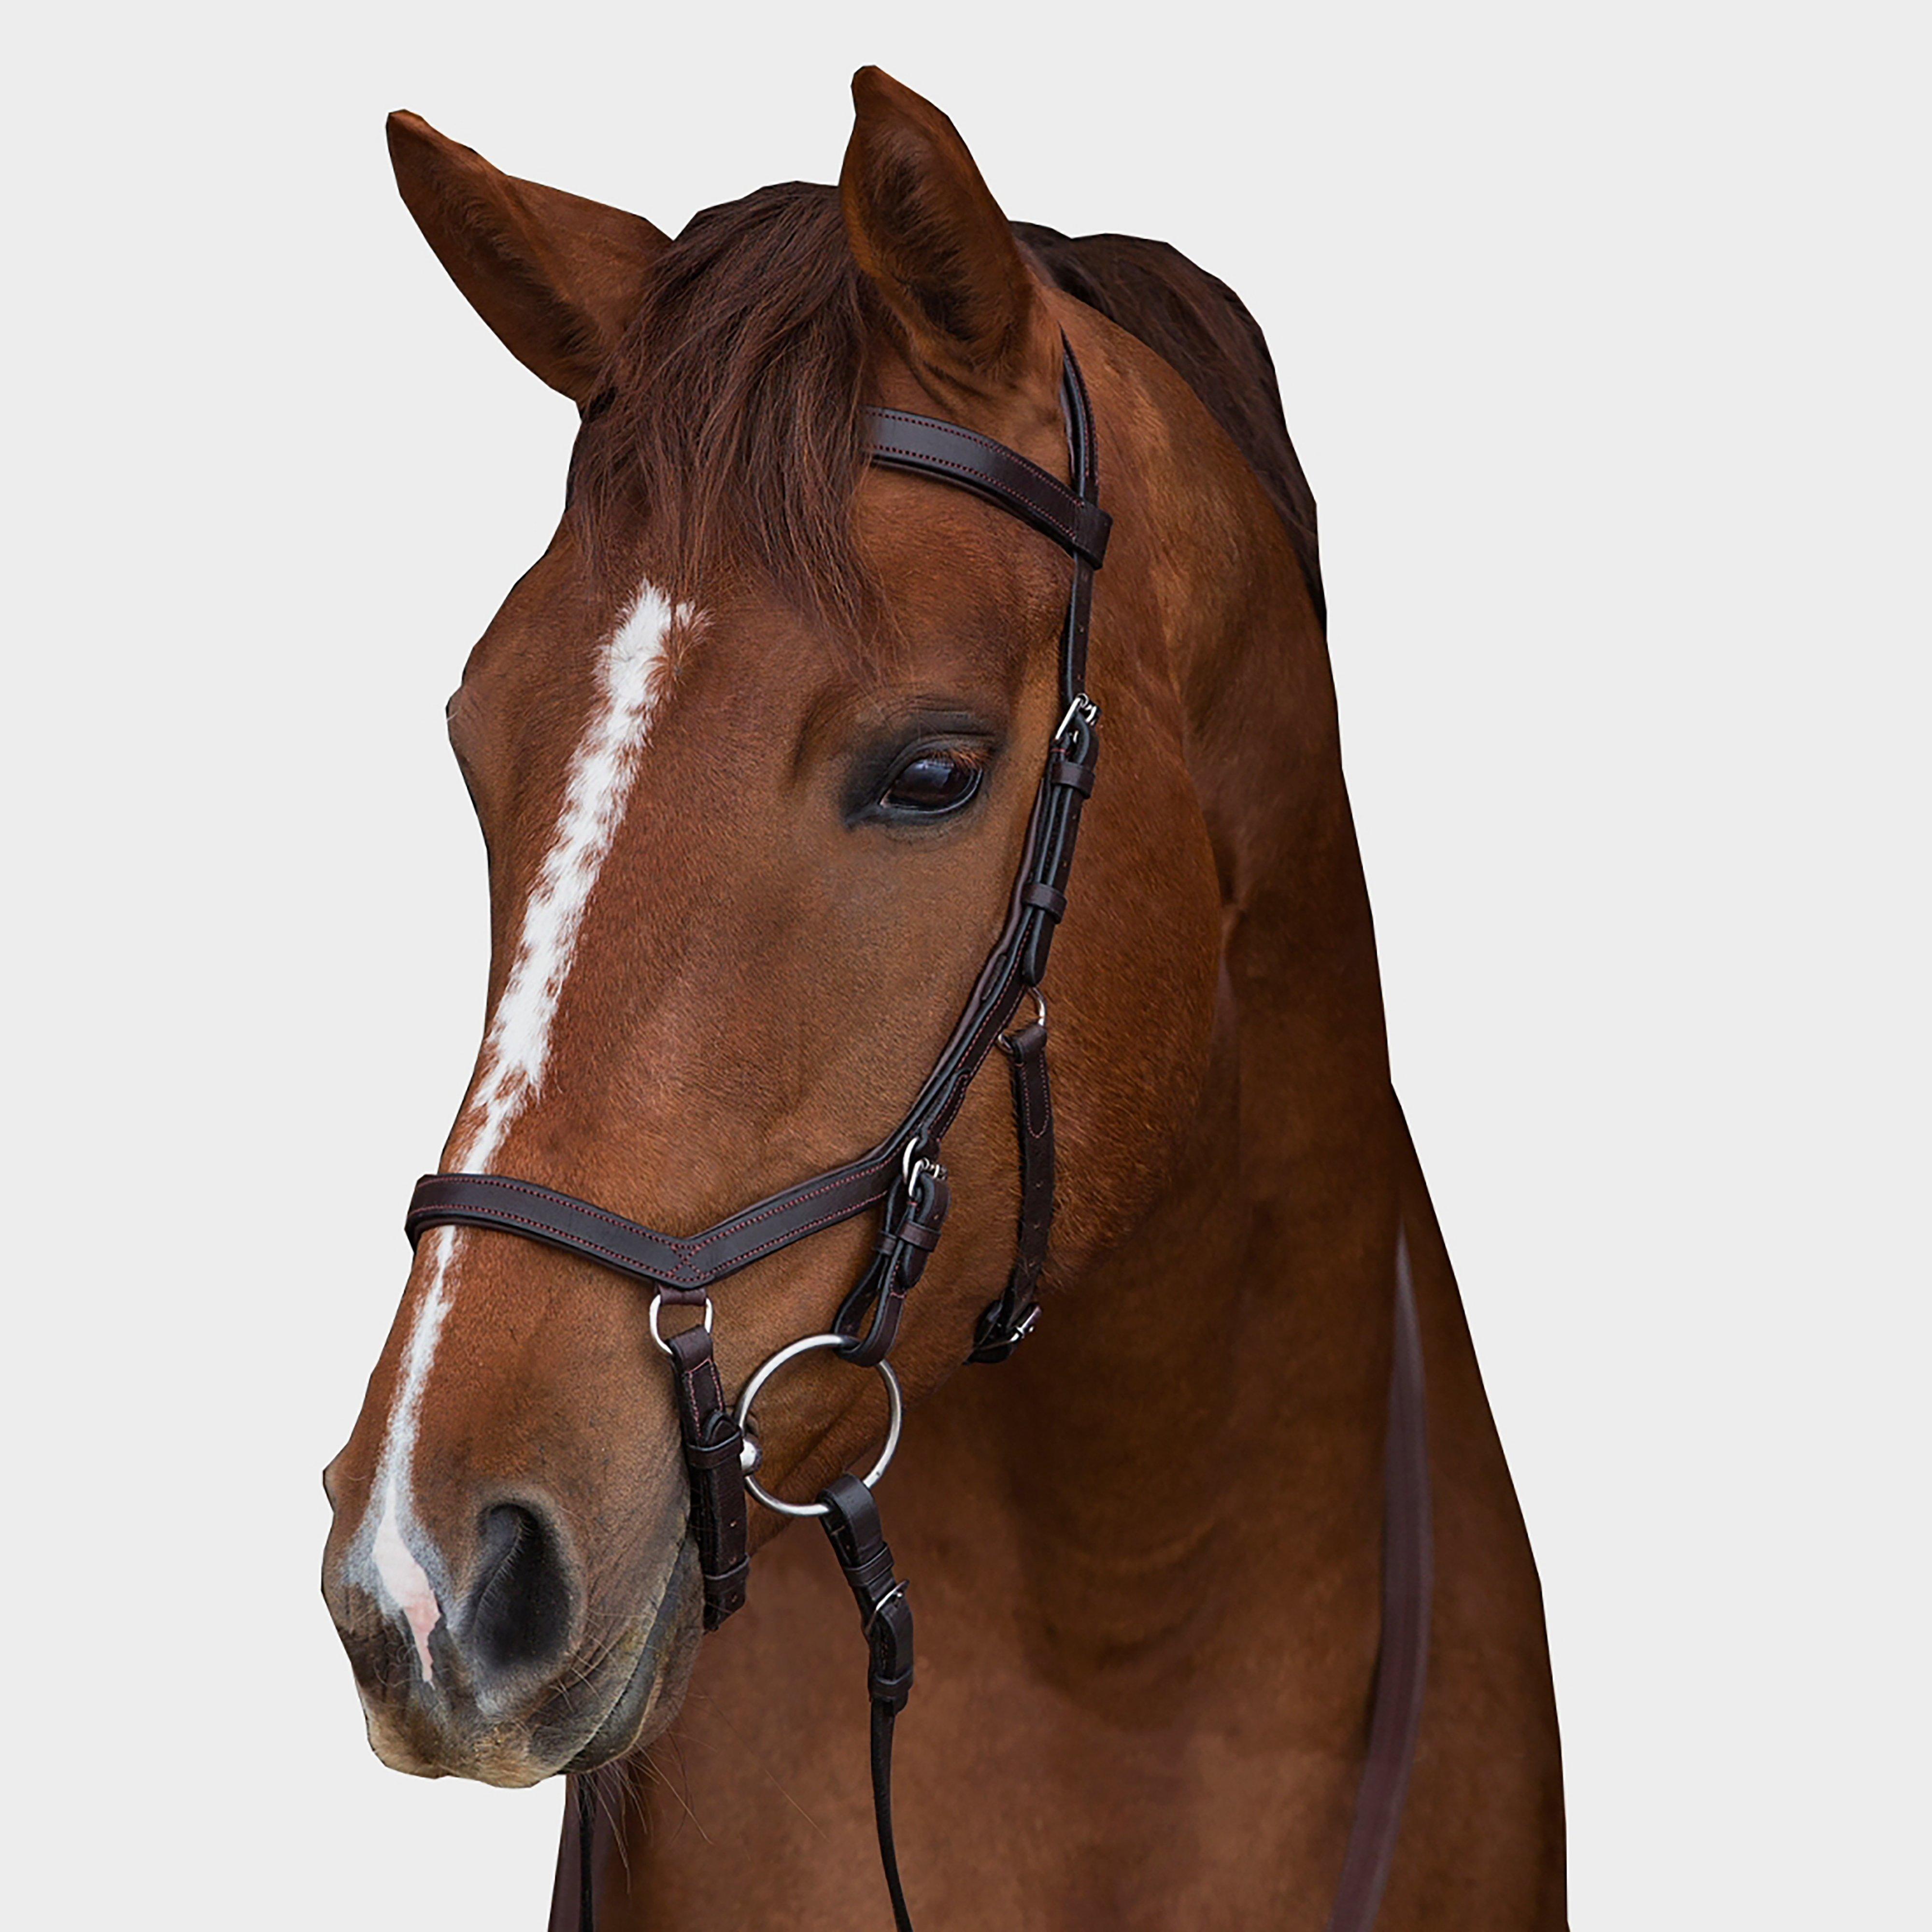  Horseware Rambo Micklem Competition Bridle, Brown